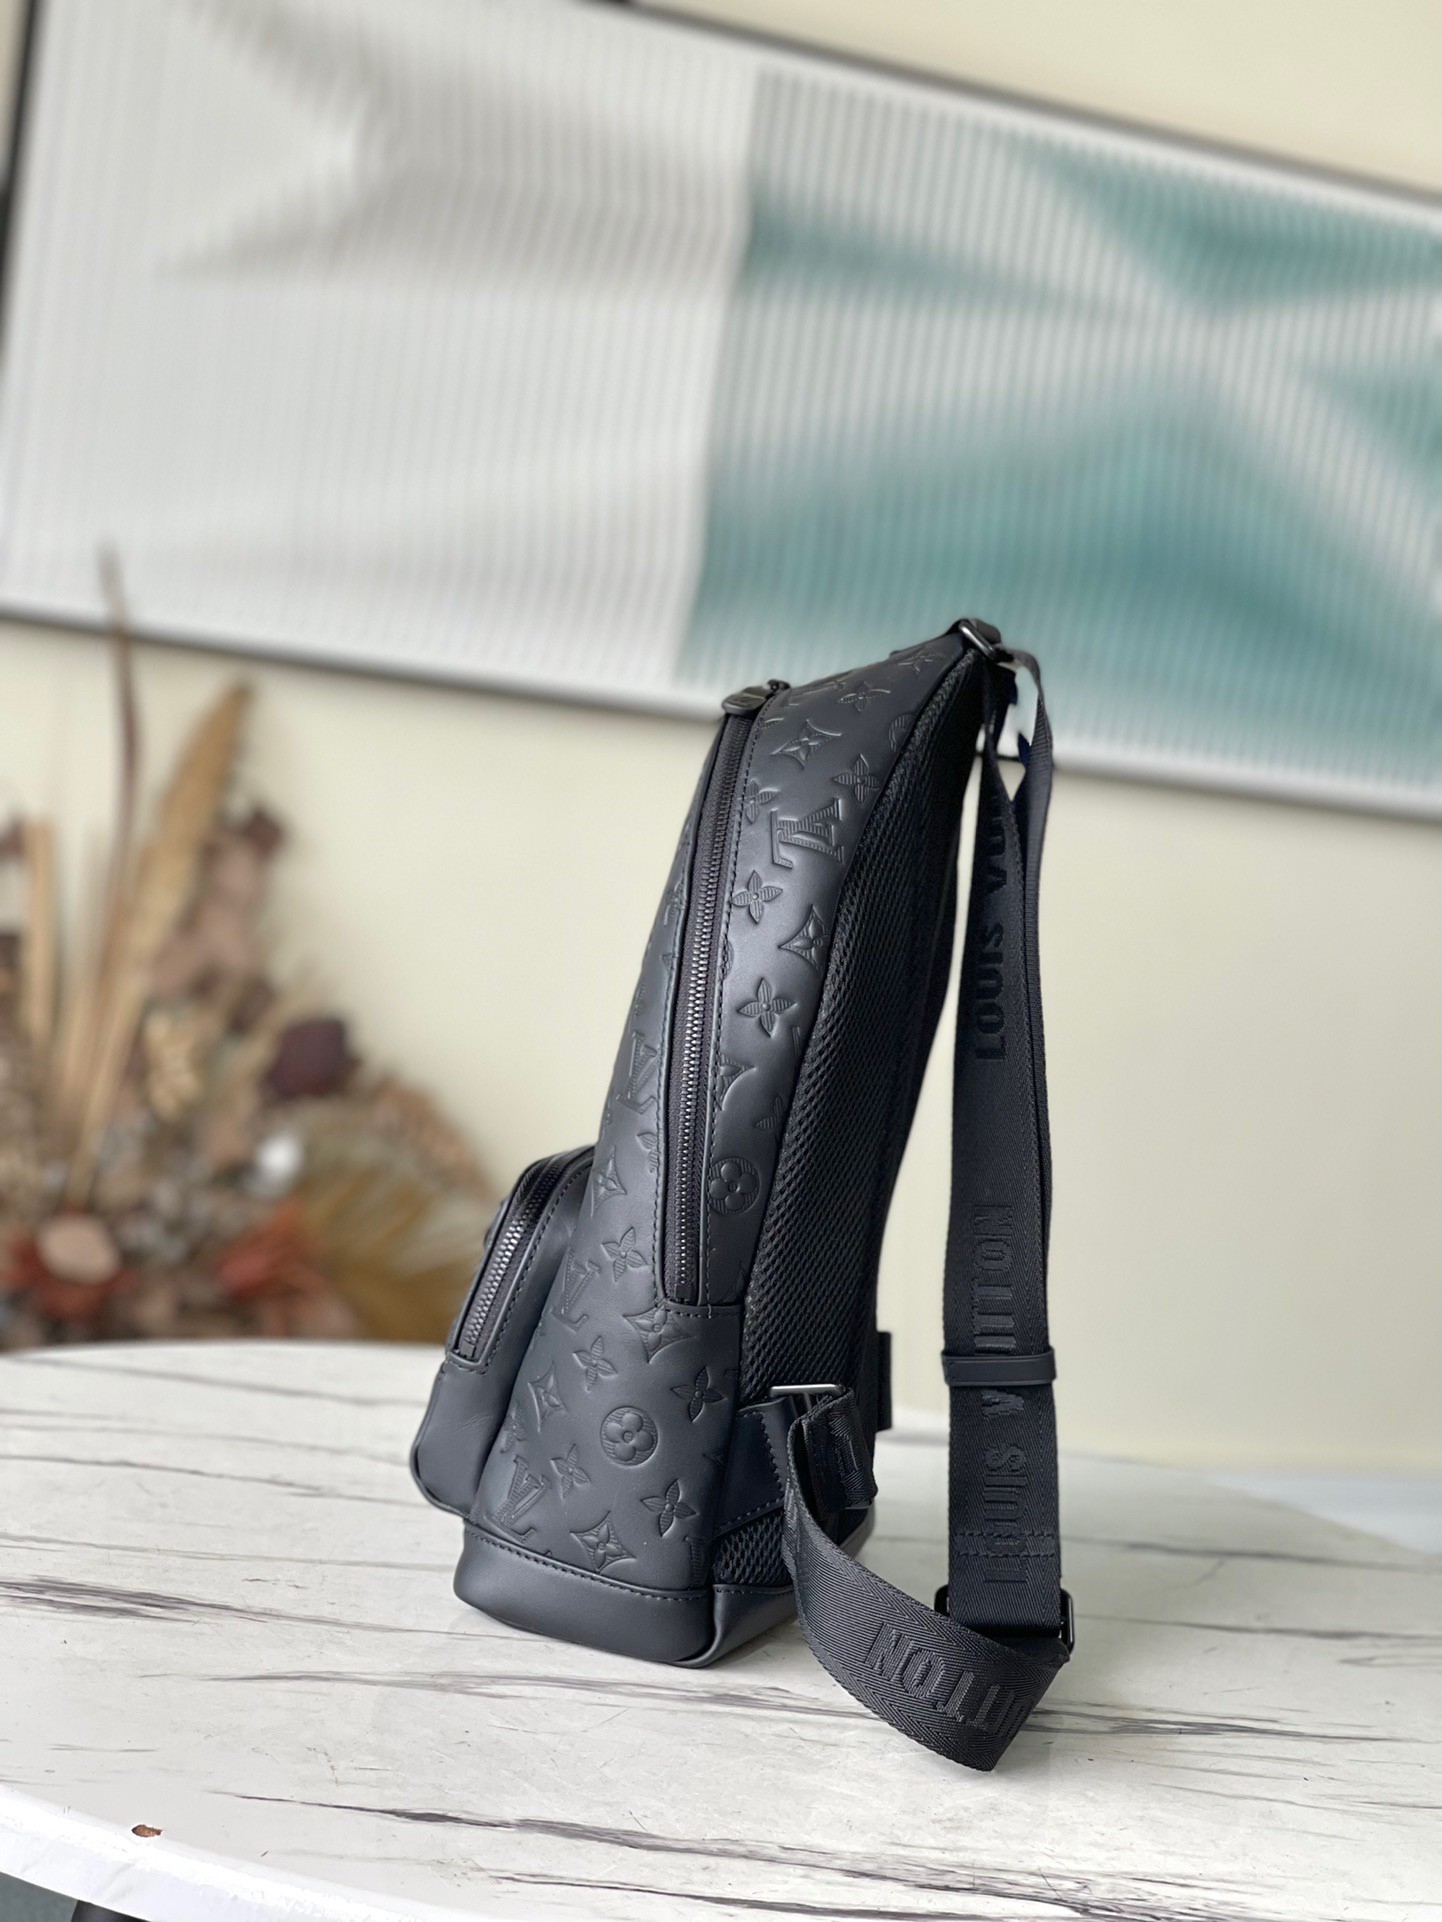 Shop Louis Vuitton Racer Backpack (M46105, M46109) by SolidConnection